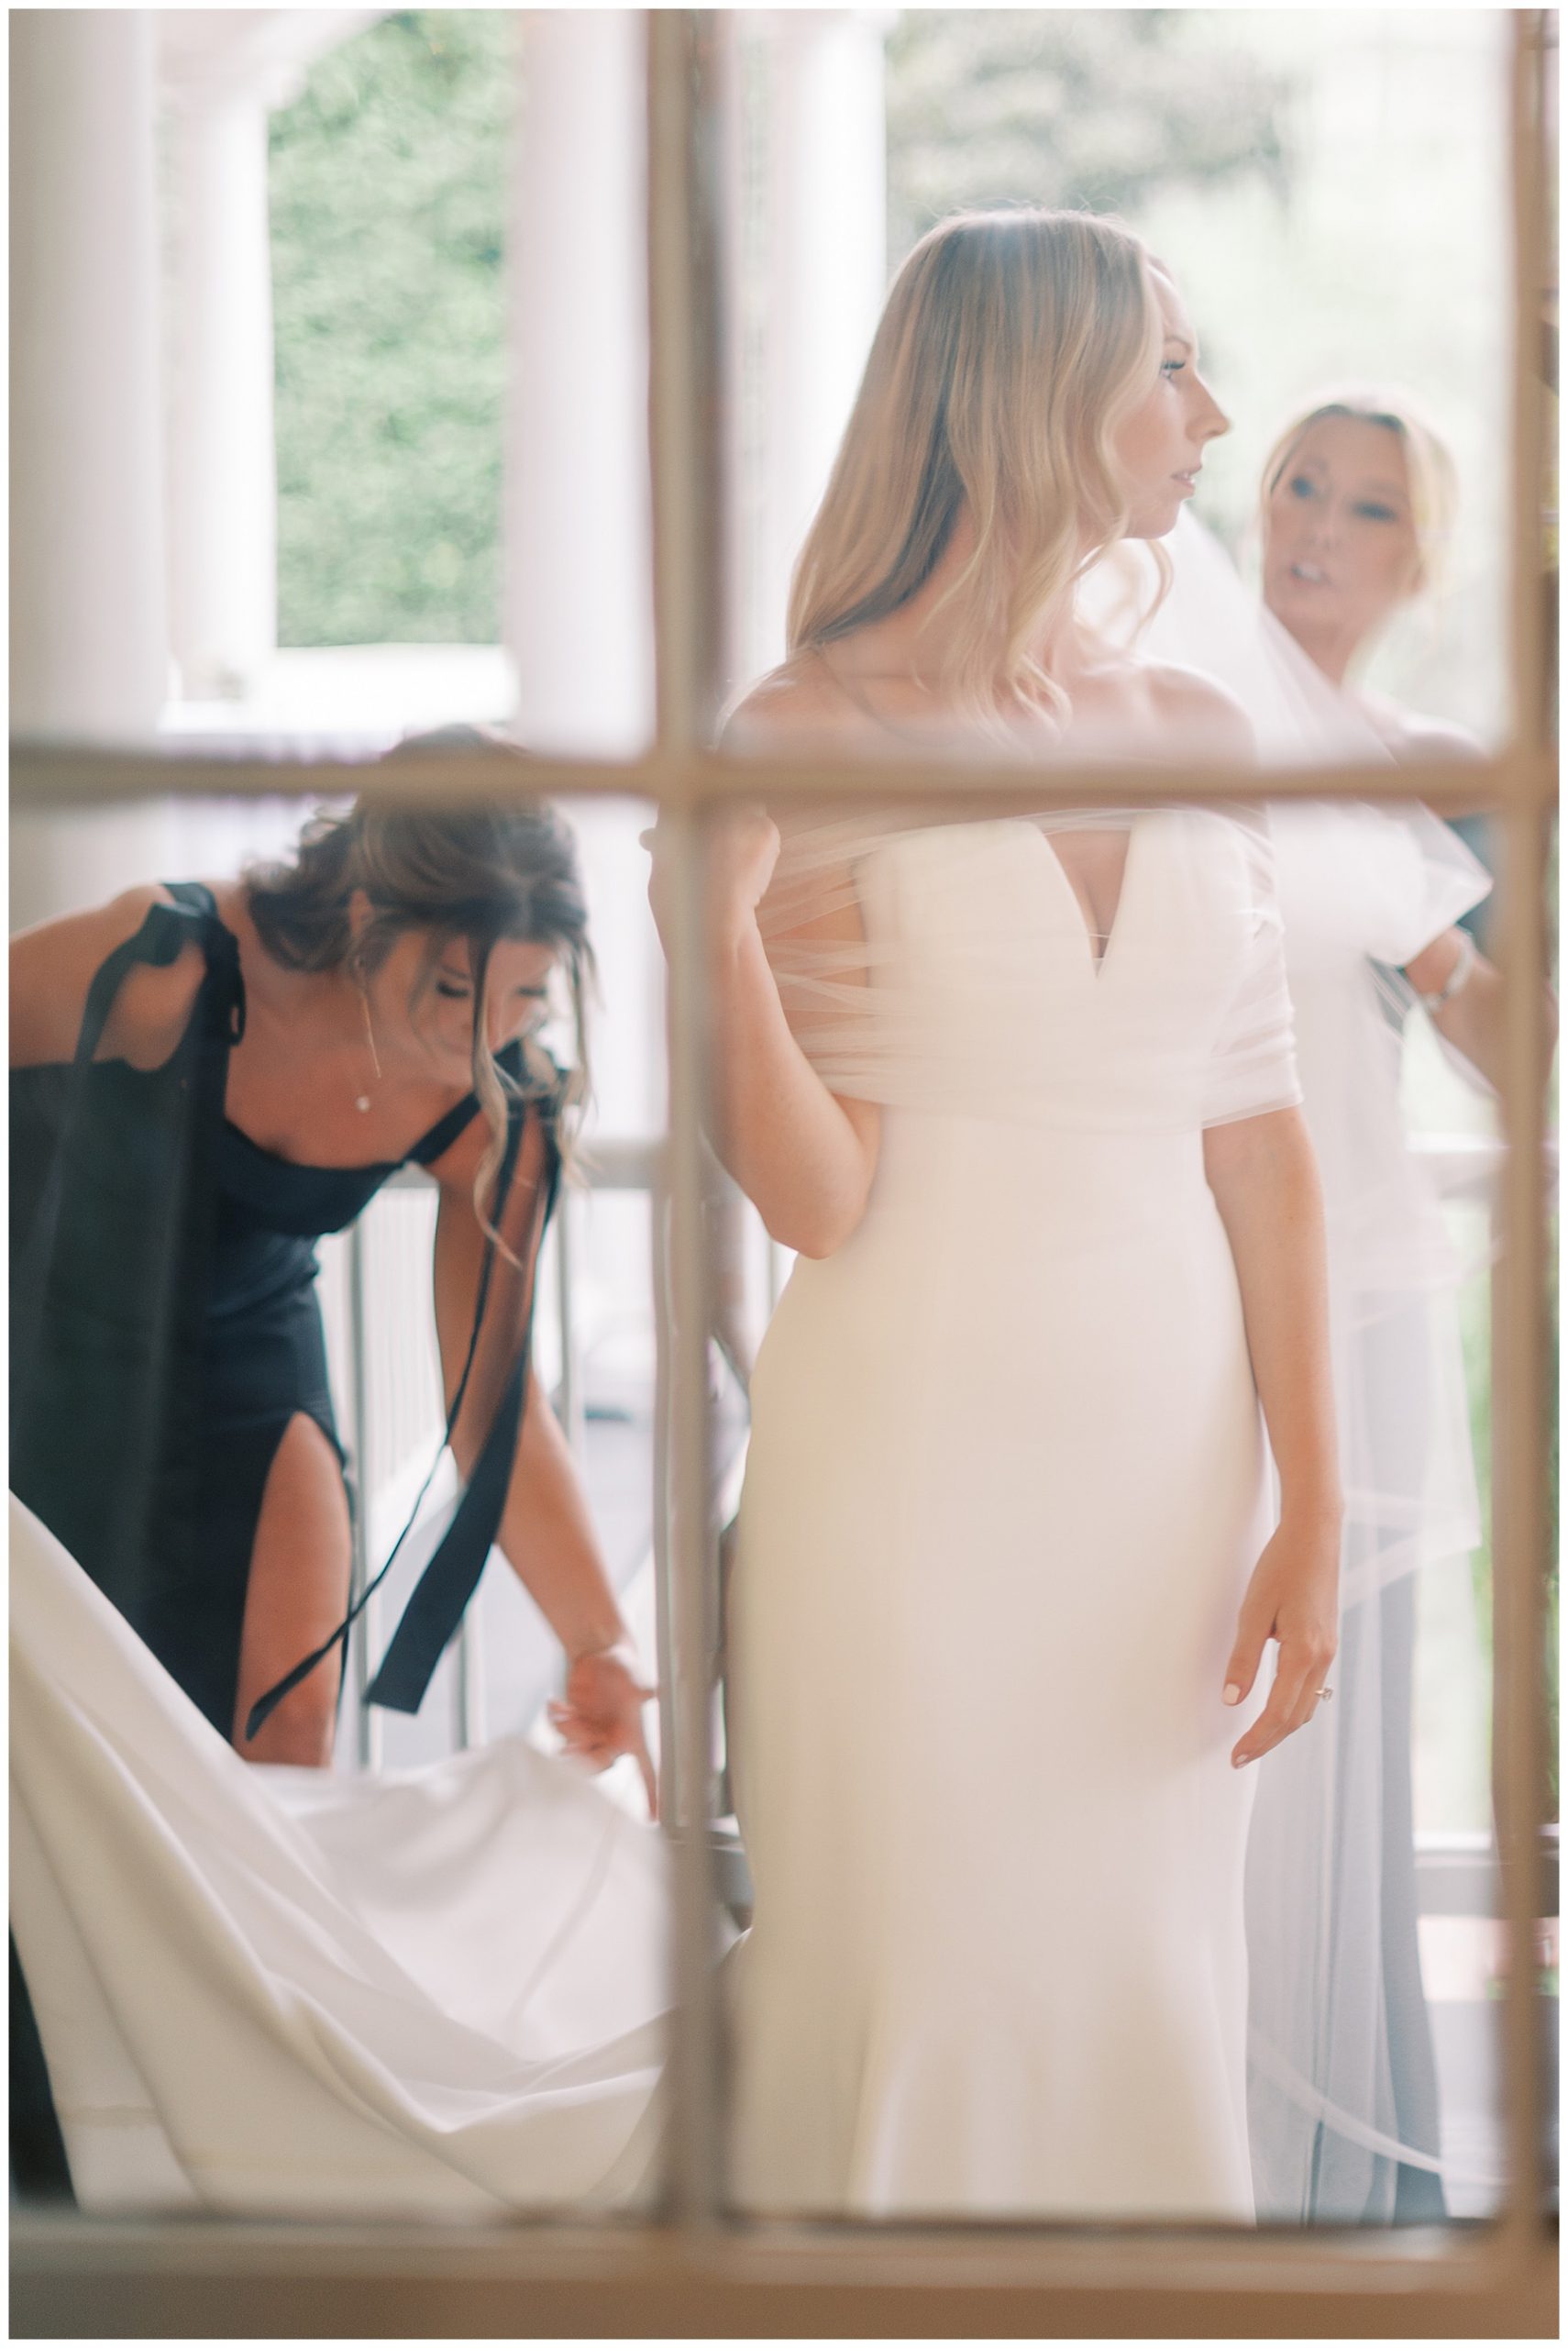 reflection of bridesmaid helping place bride's wedding dress on balcony 